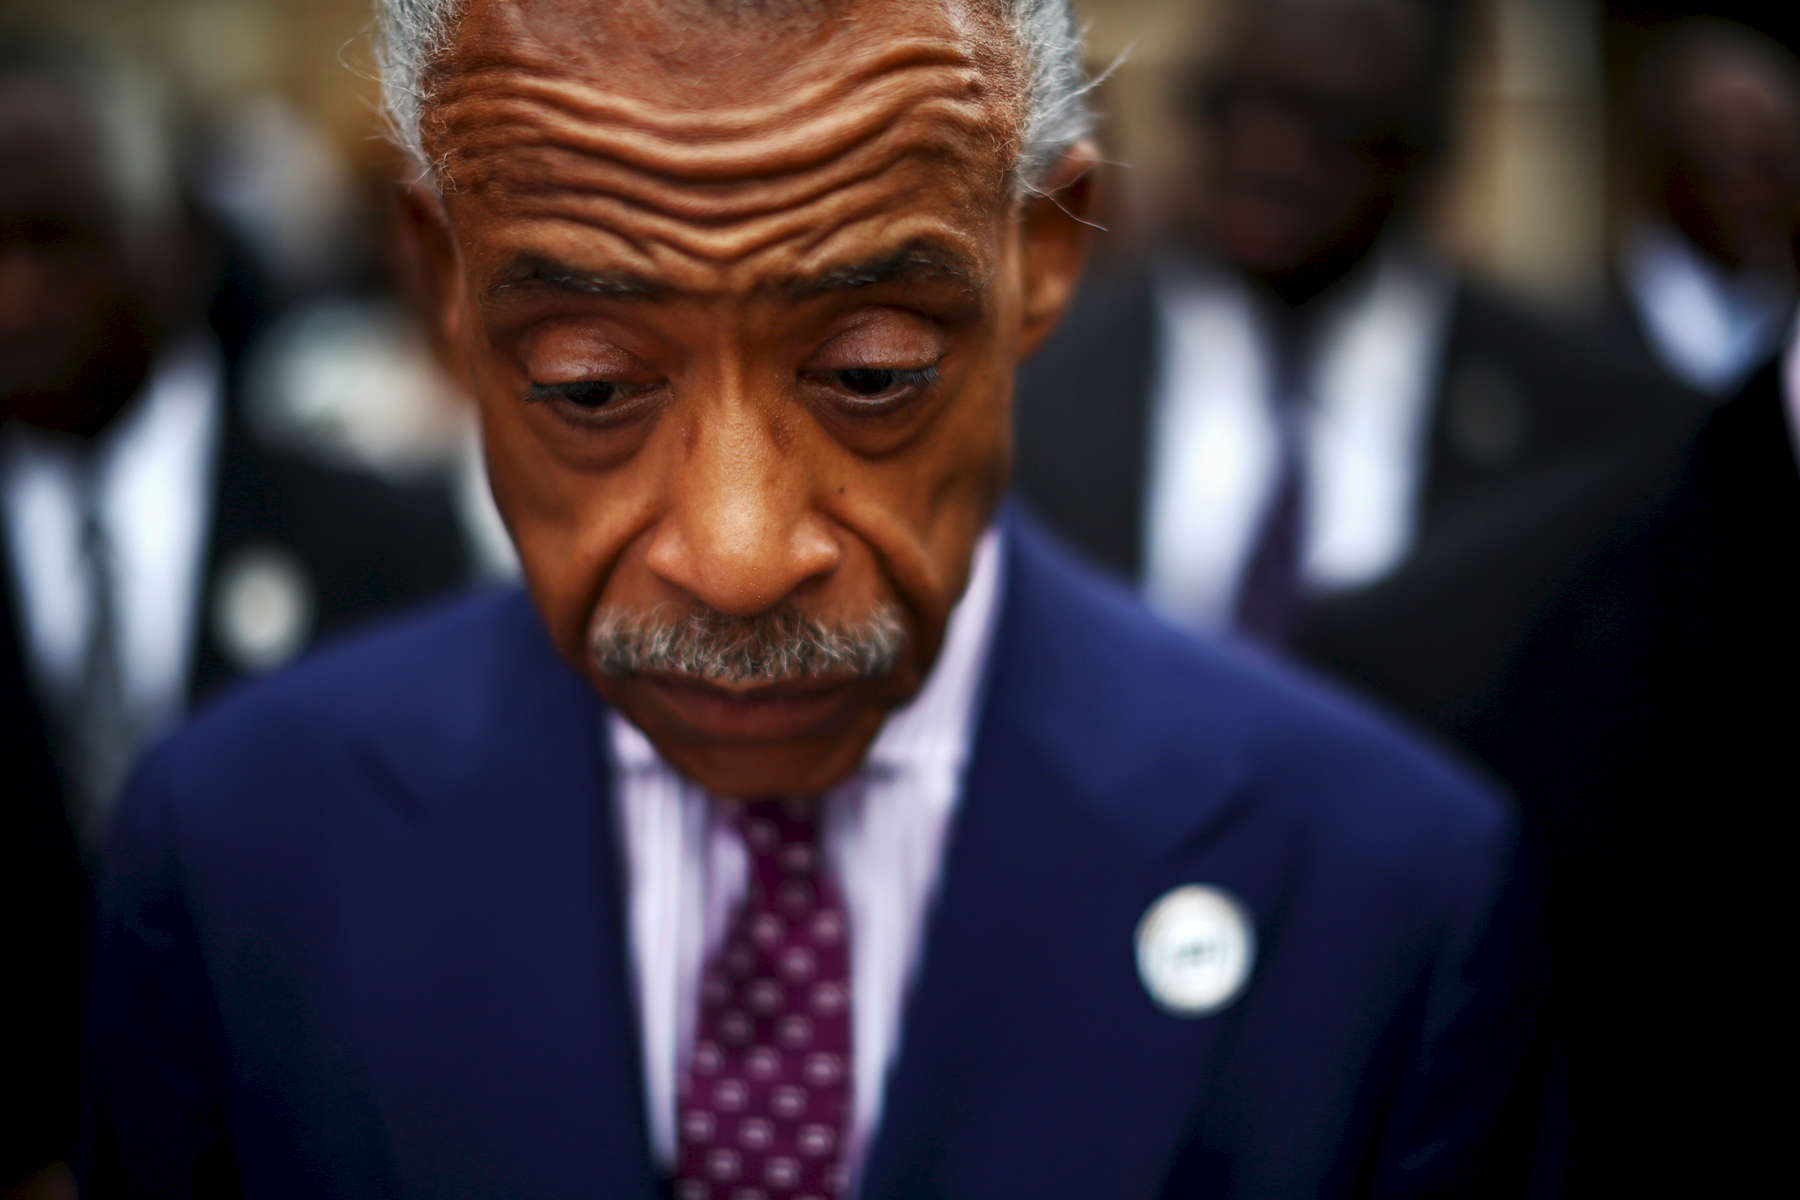 NAT *** North Charleston, SC -- 06/25/2015 - Al Sharpton attended the funeral and stood outside afterward.The Funeral of Ethel Lance is held at Royal Missionary Baptist Church in North Charleston on Thursday.  Mourners gathered as funerals began on Thursday for victims of nine people murdered in the Charleston massacre last week.  (Travis Dove for The New York Times)